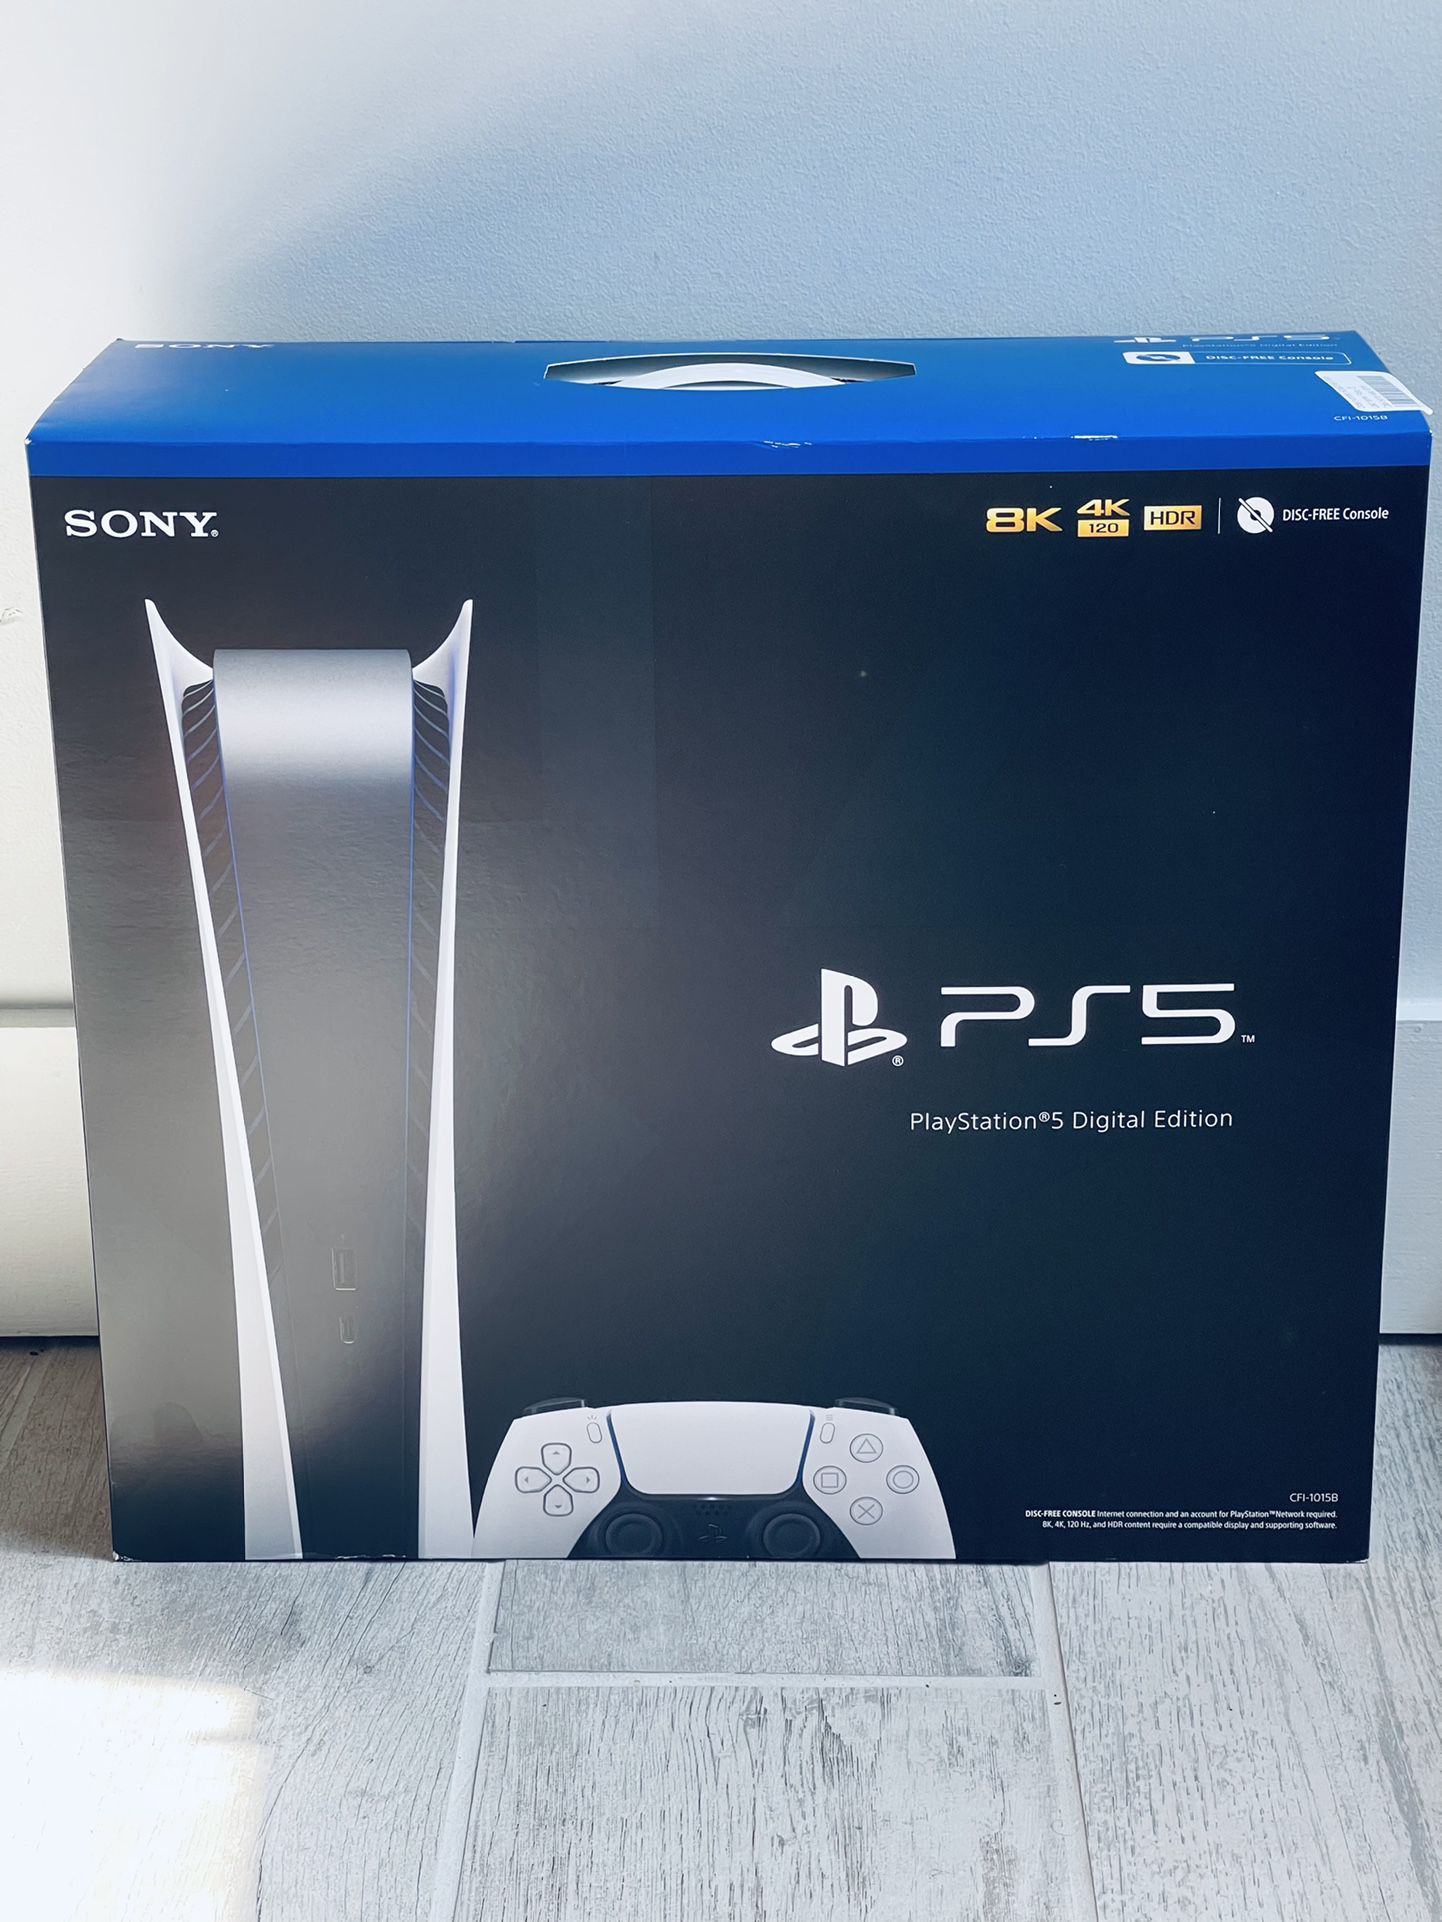 Tegne forsikring historie Gylden Sony PlayStation 5 PS5 DIGITAL Edition Video Game Console Brand New for  Sale in Santa Rosa Beach, FL - OfferUp